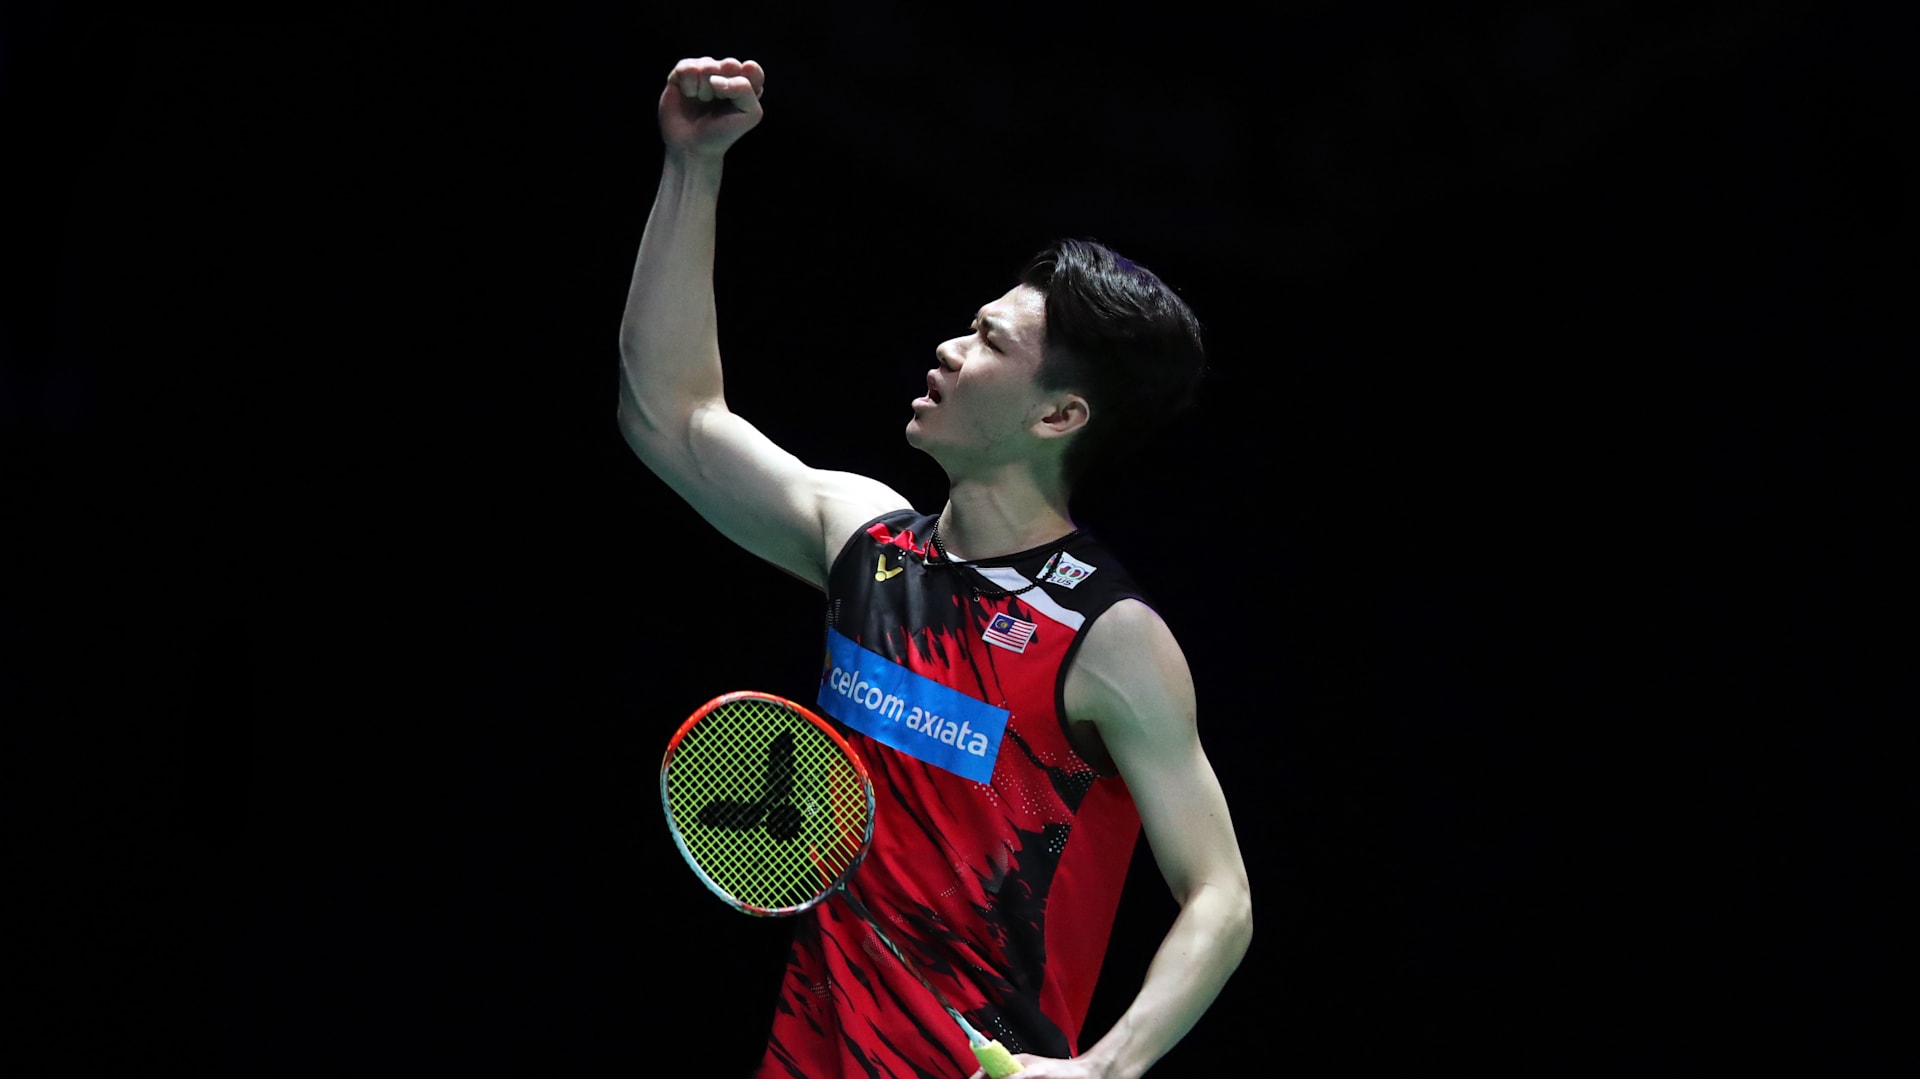 Badminton Indonesia Open 2021 Preview, schedule, and watch live streaming and telecast in Malaysia